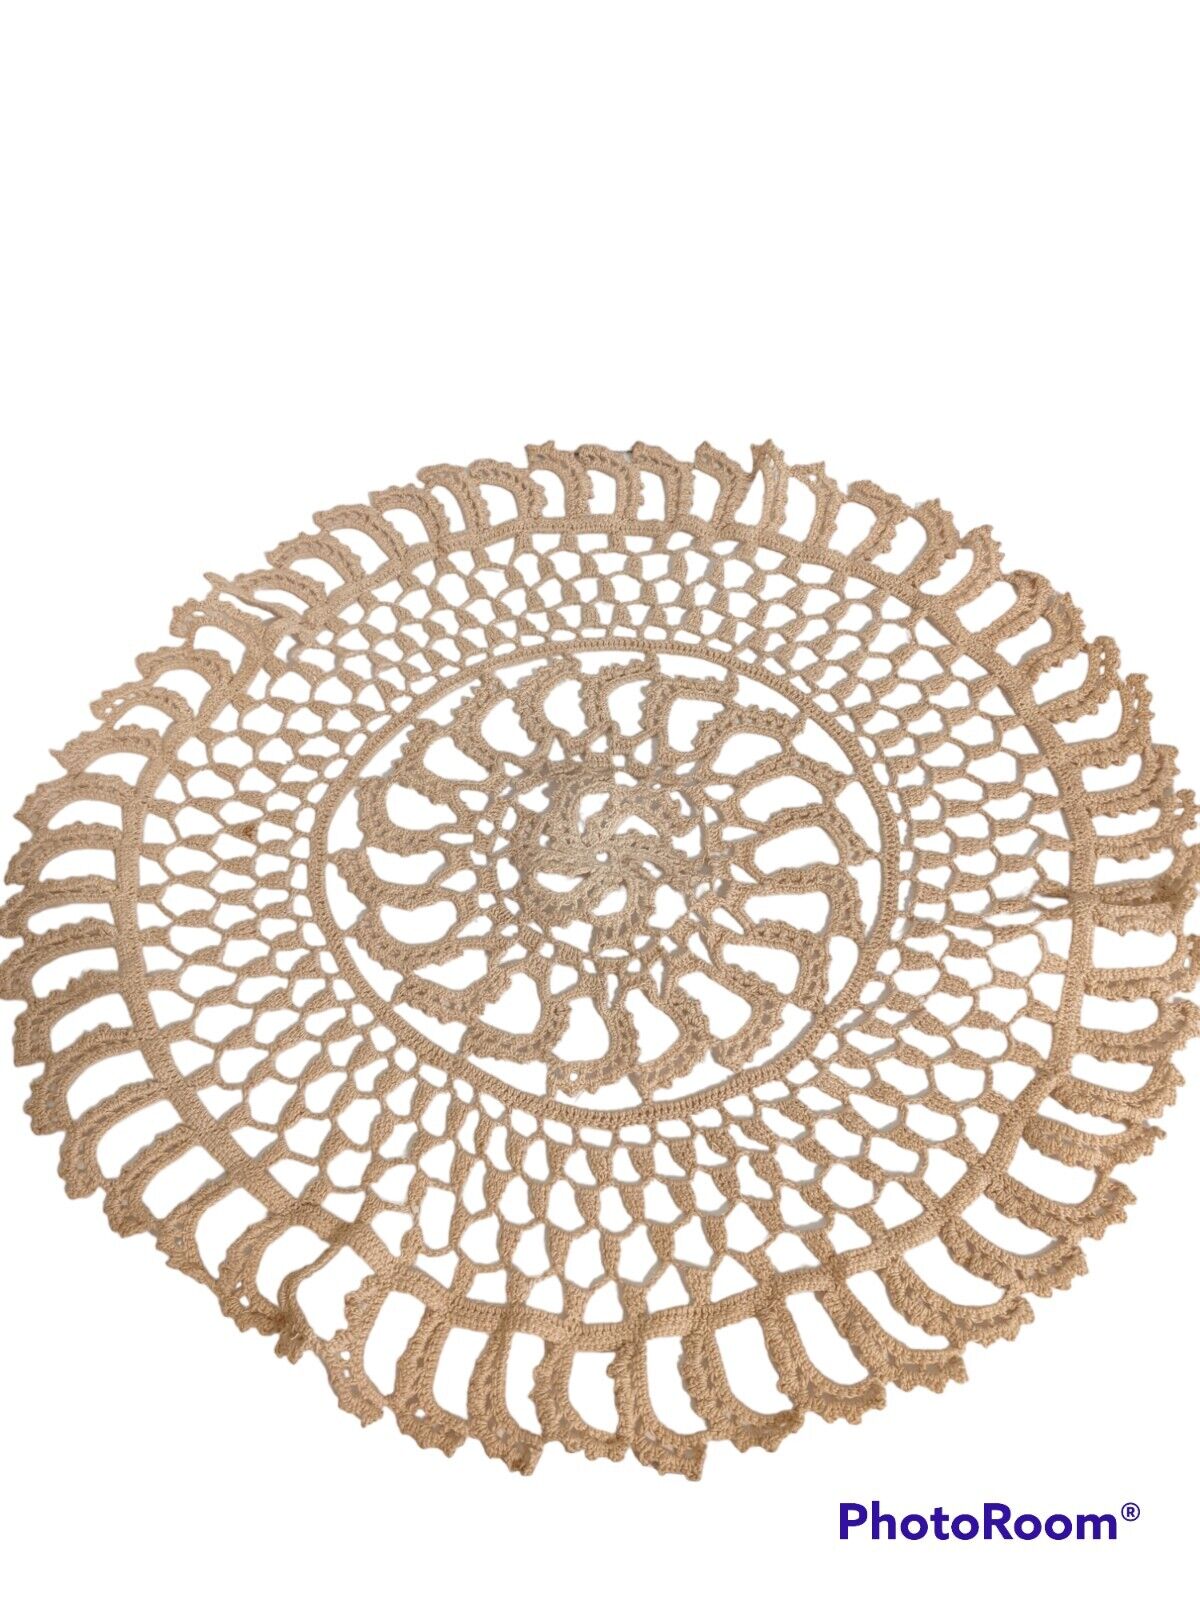 Handmade Crocheted Doily Coffee Table Covering Round Beige Tan 20 Inch see desc